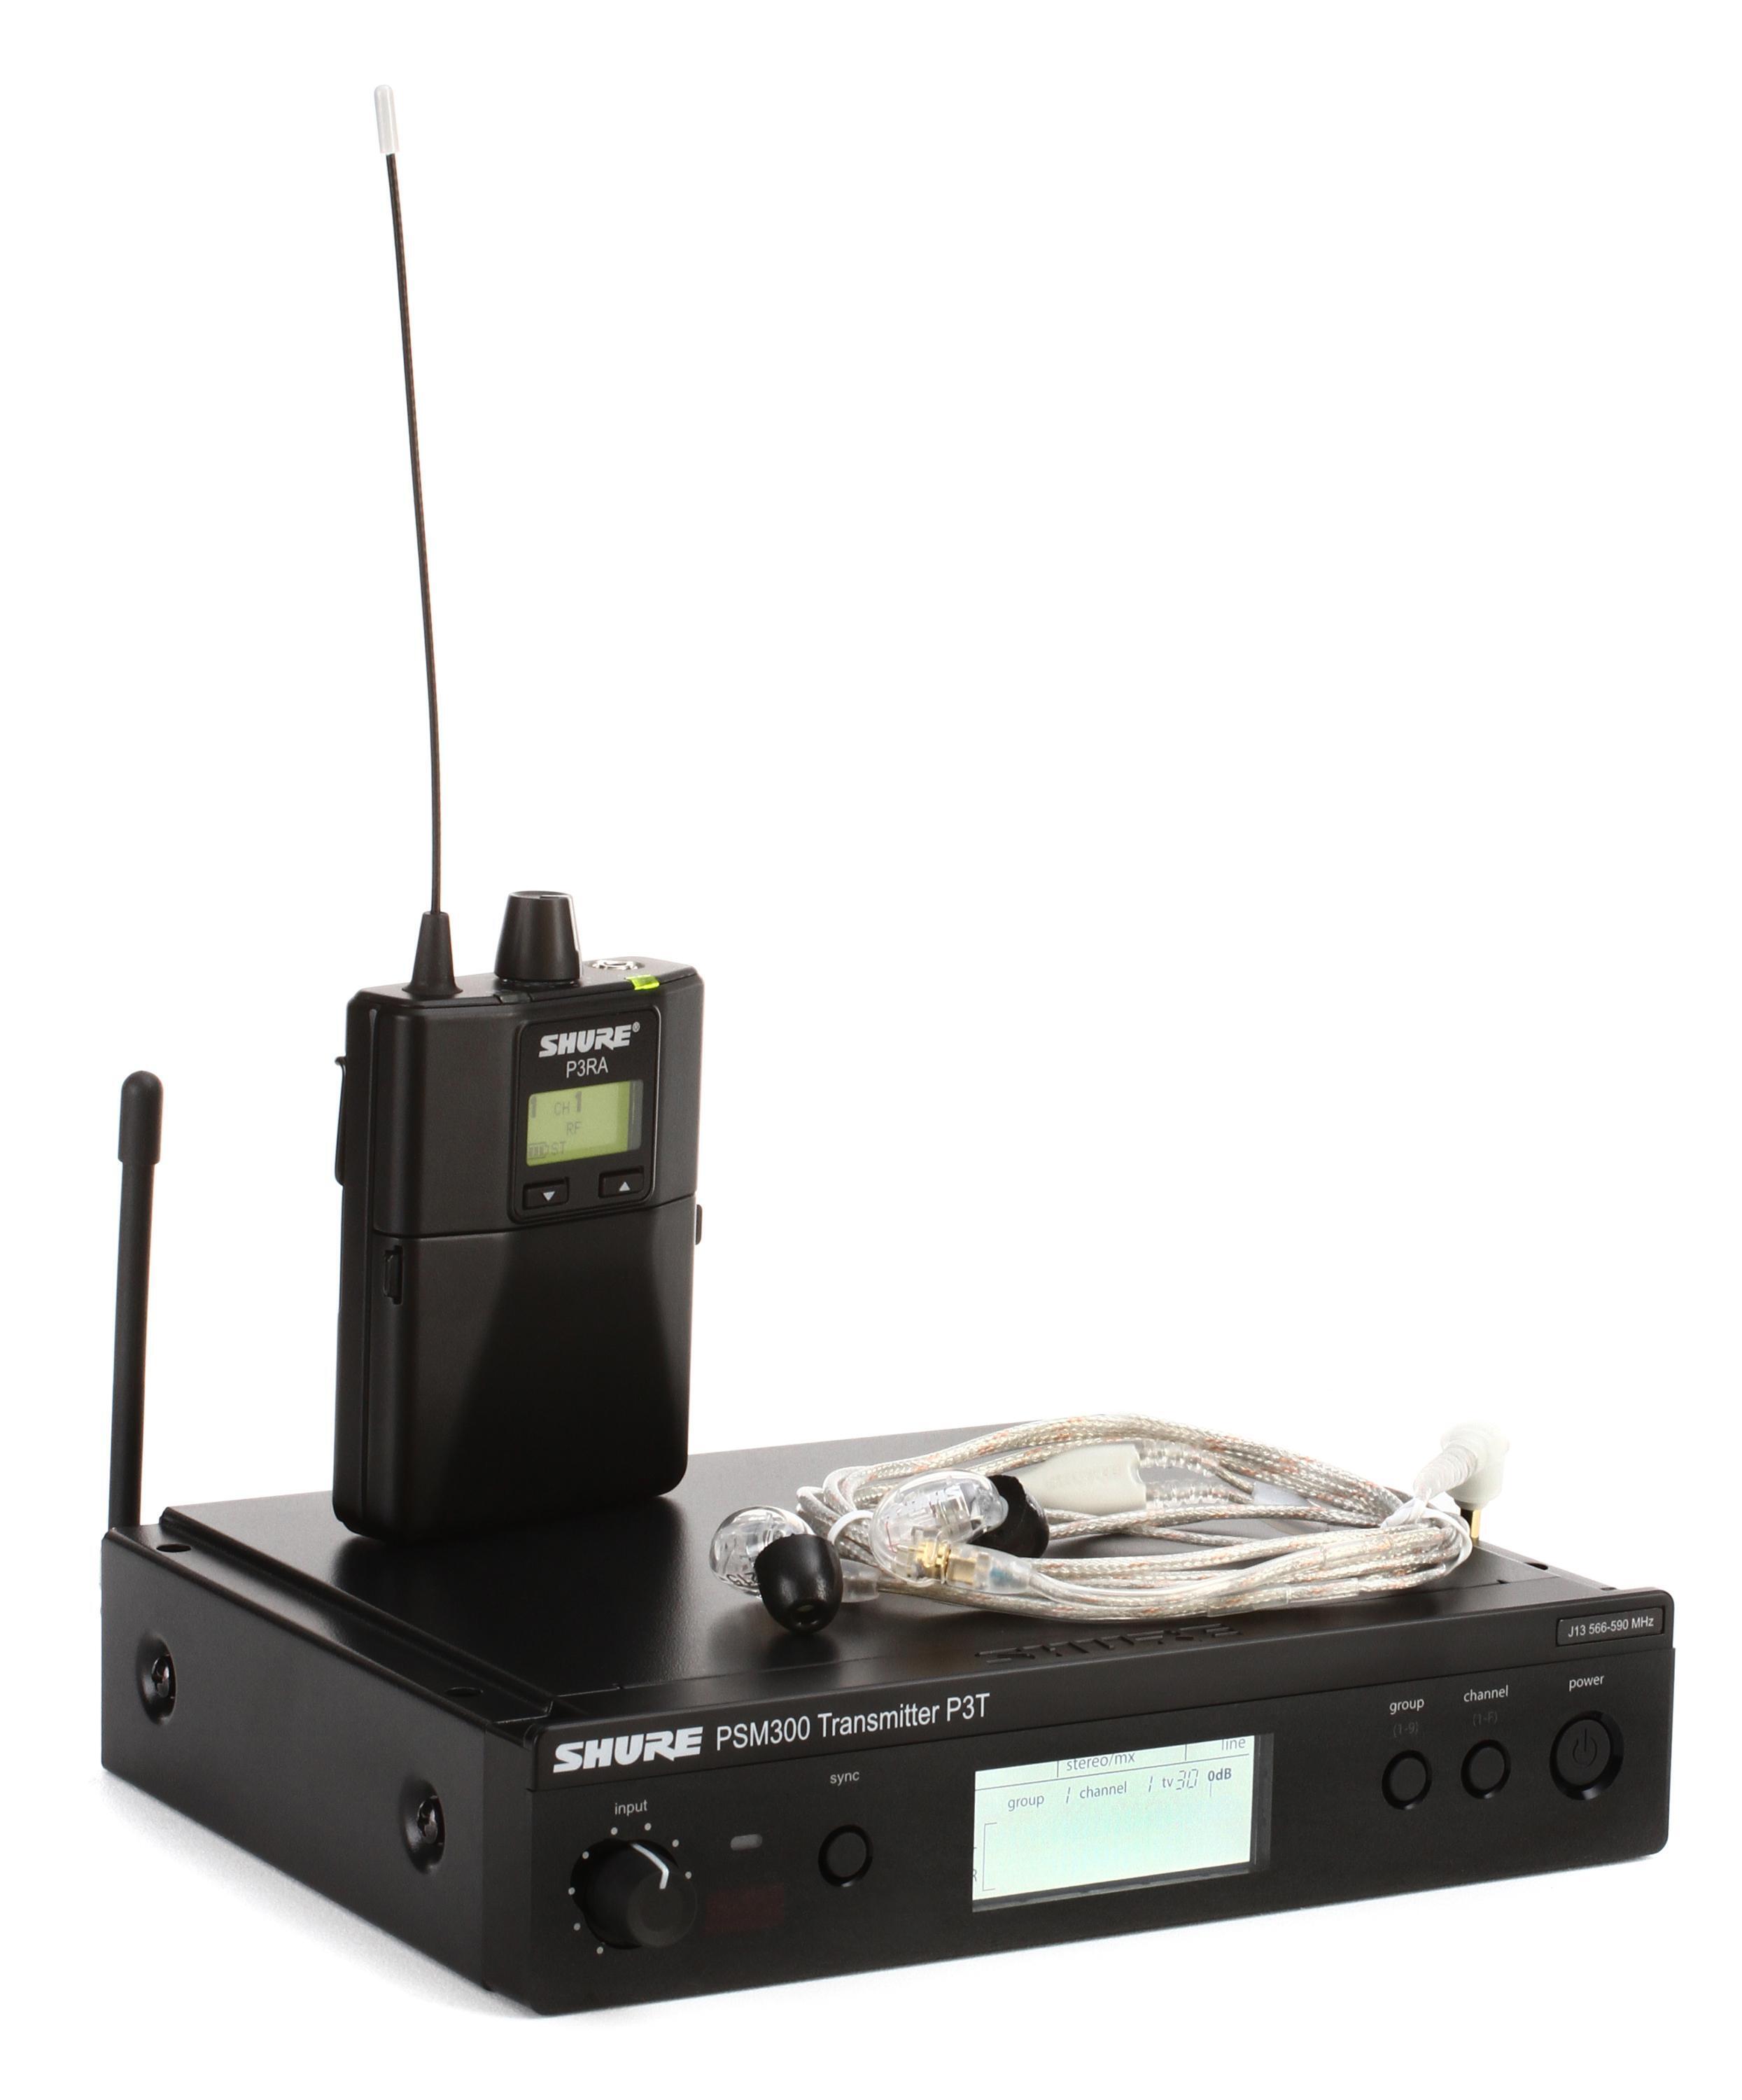 Bundled Item: Shure PSM300 P3TRA215CL Wireless In-ear Monitor System - J13 Band